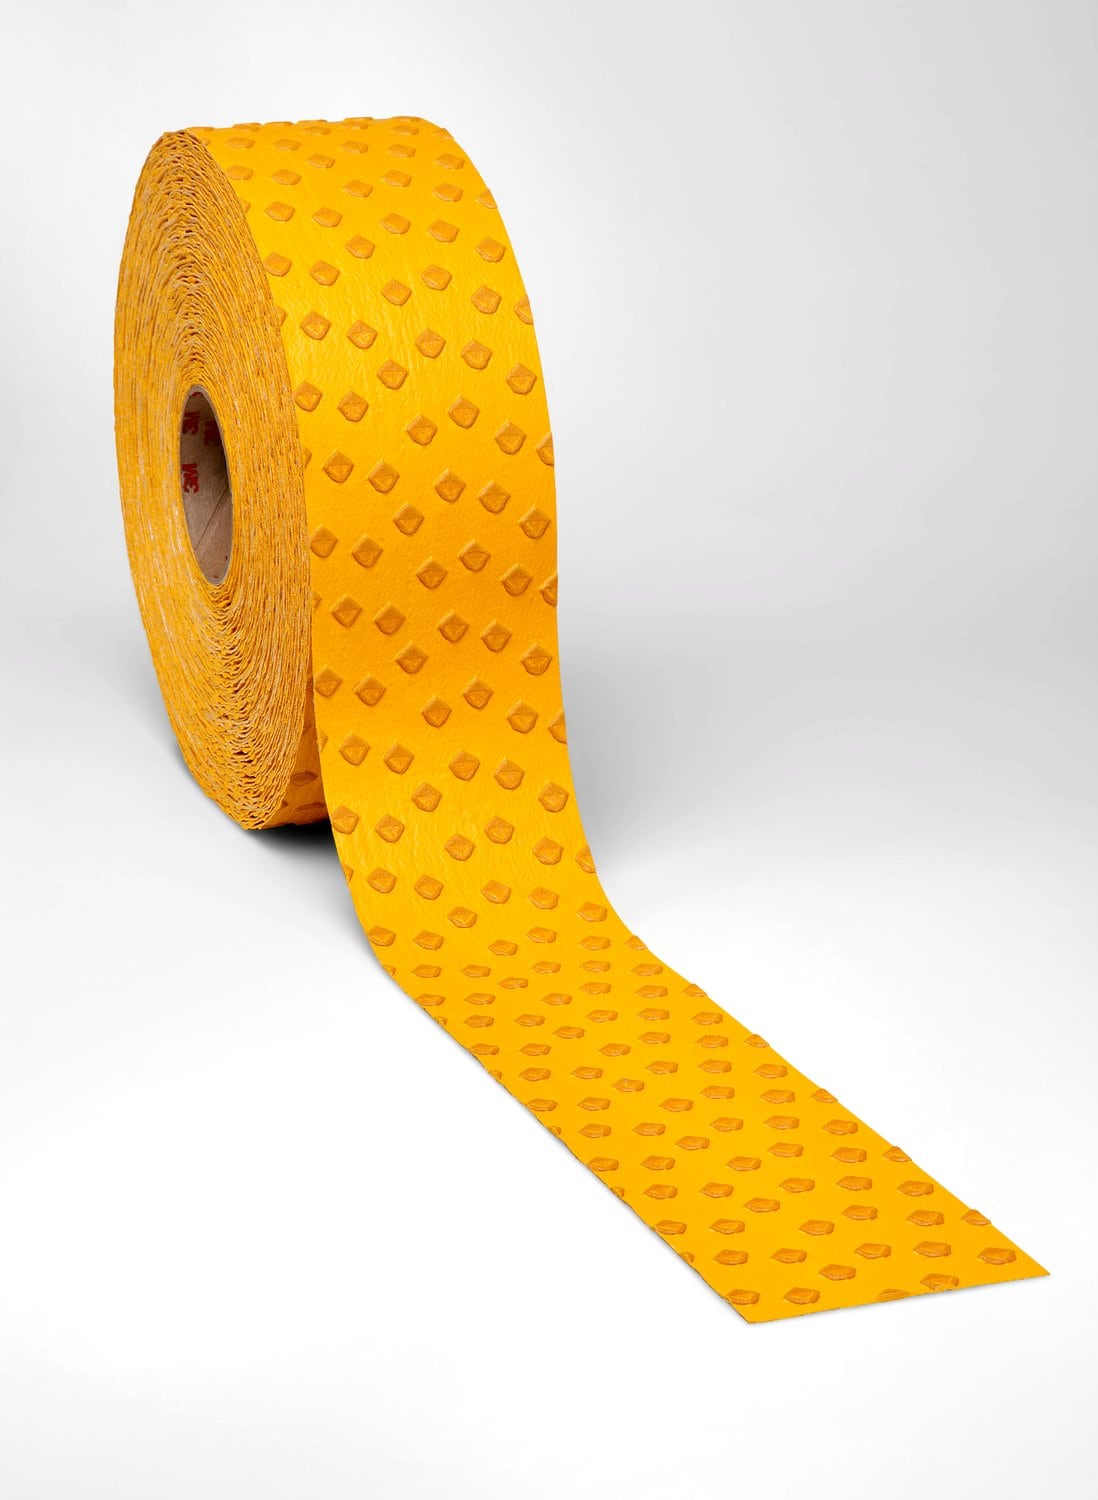 7100011260 - 3M Stamark Removable Pavement Marking Tape L711, Yellow, Linered,
Configurable Roll